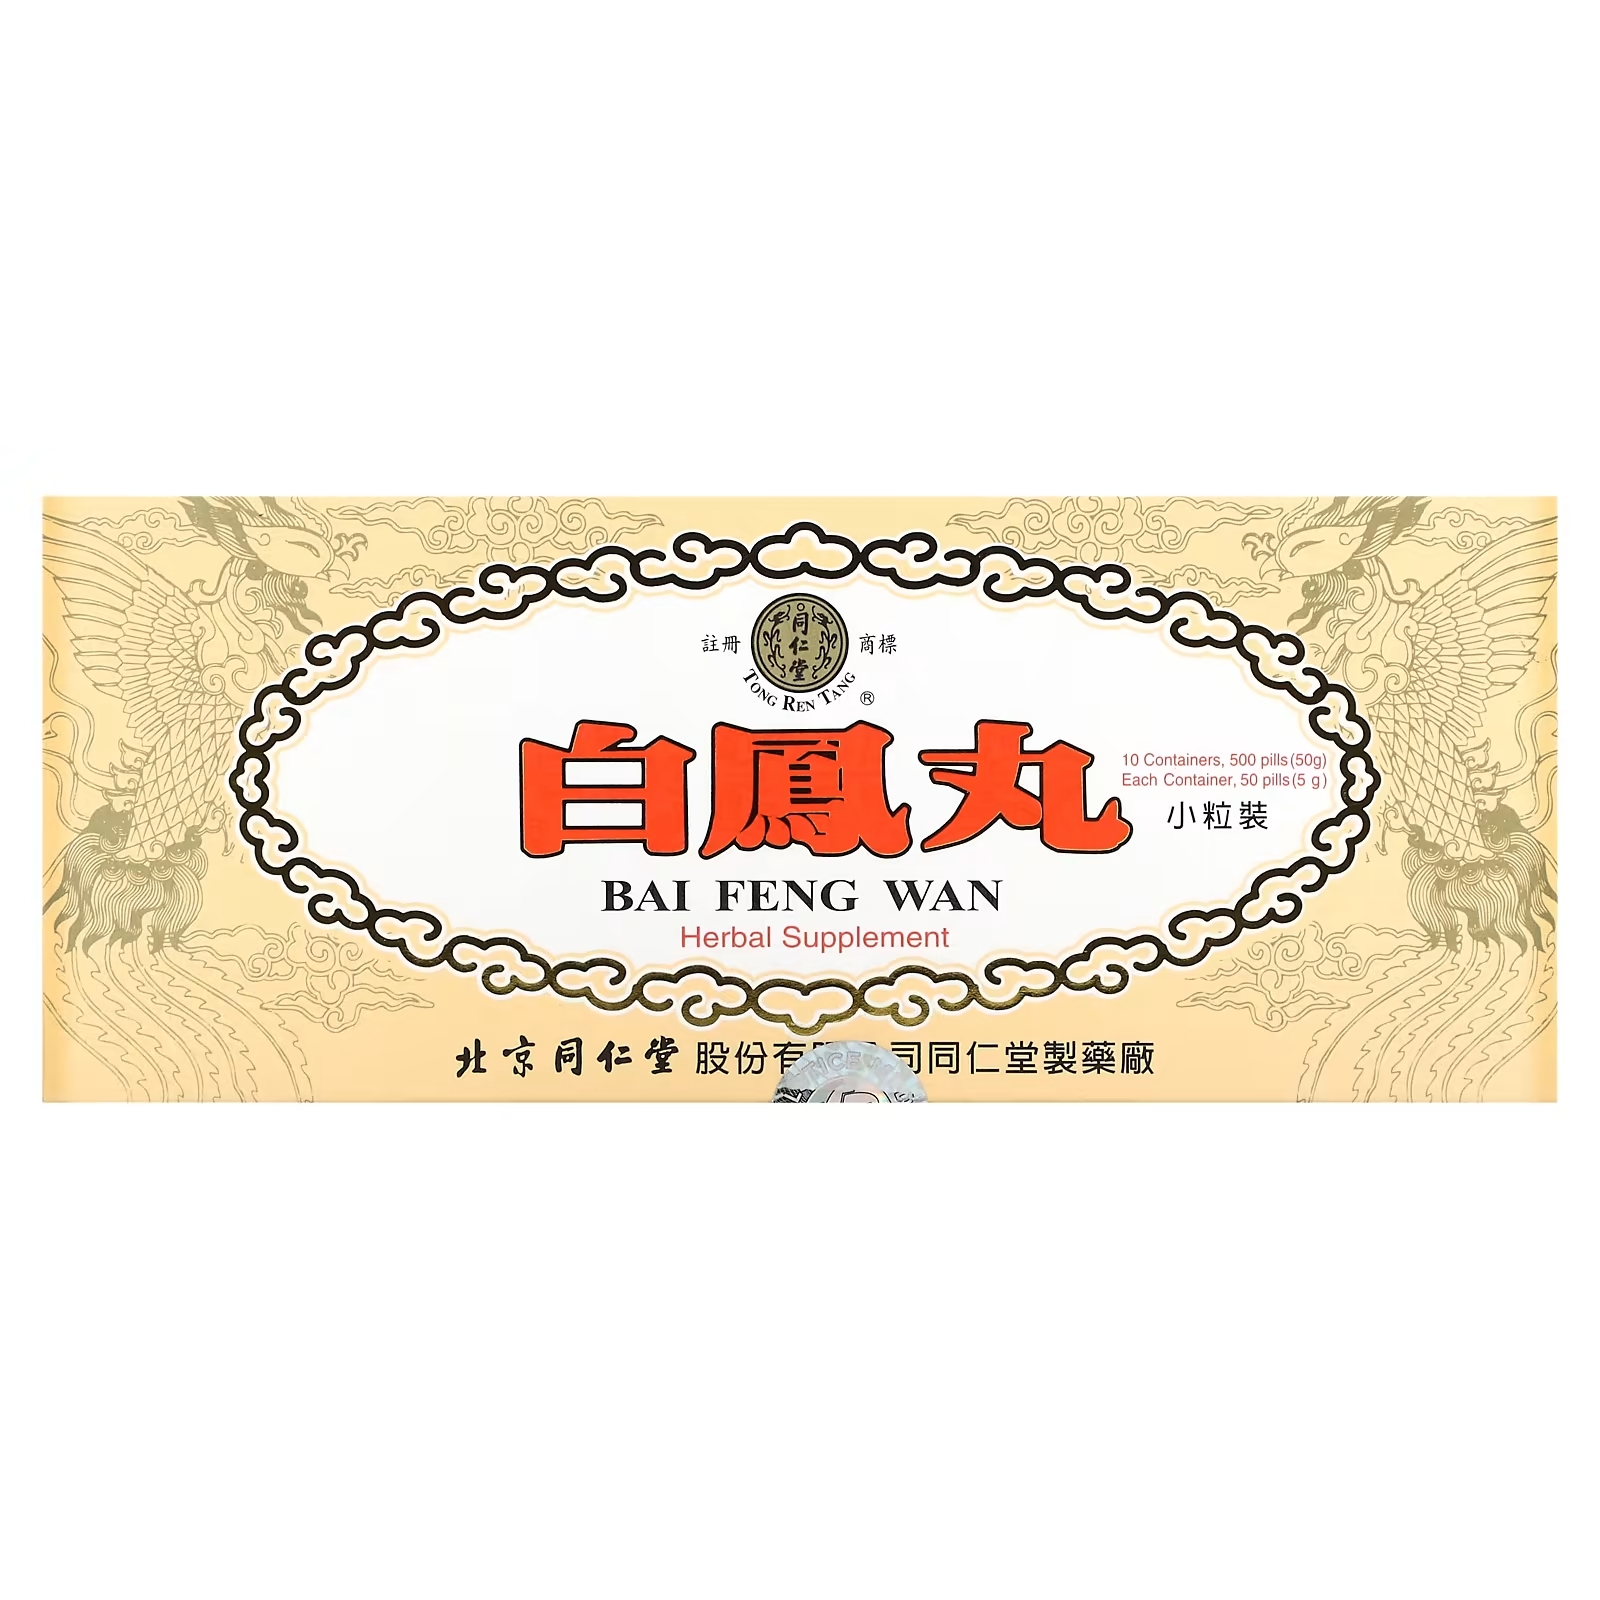 цена Tong Ren Tang Bai Feng Wan Supports the Health of the Body and Helps Maintain Energy Levels 10 Containers, 500шт